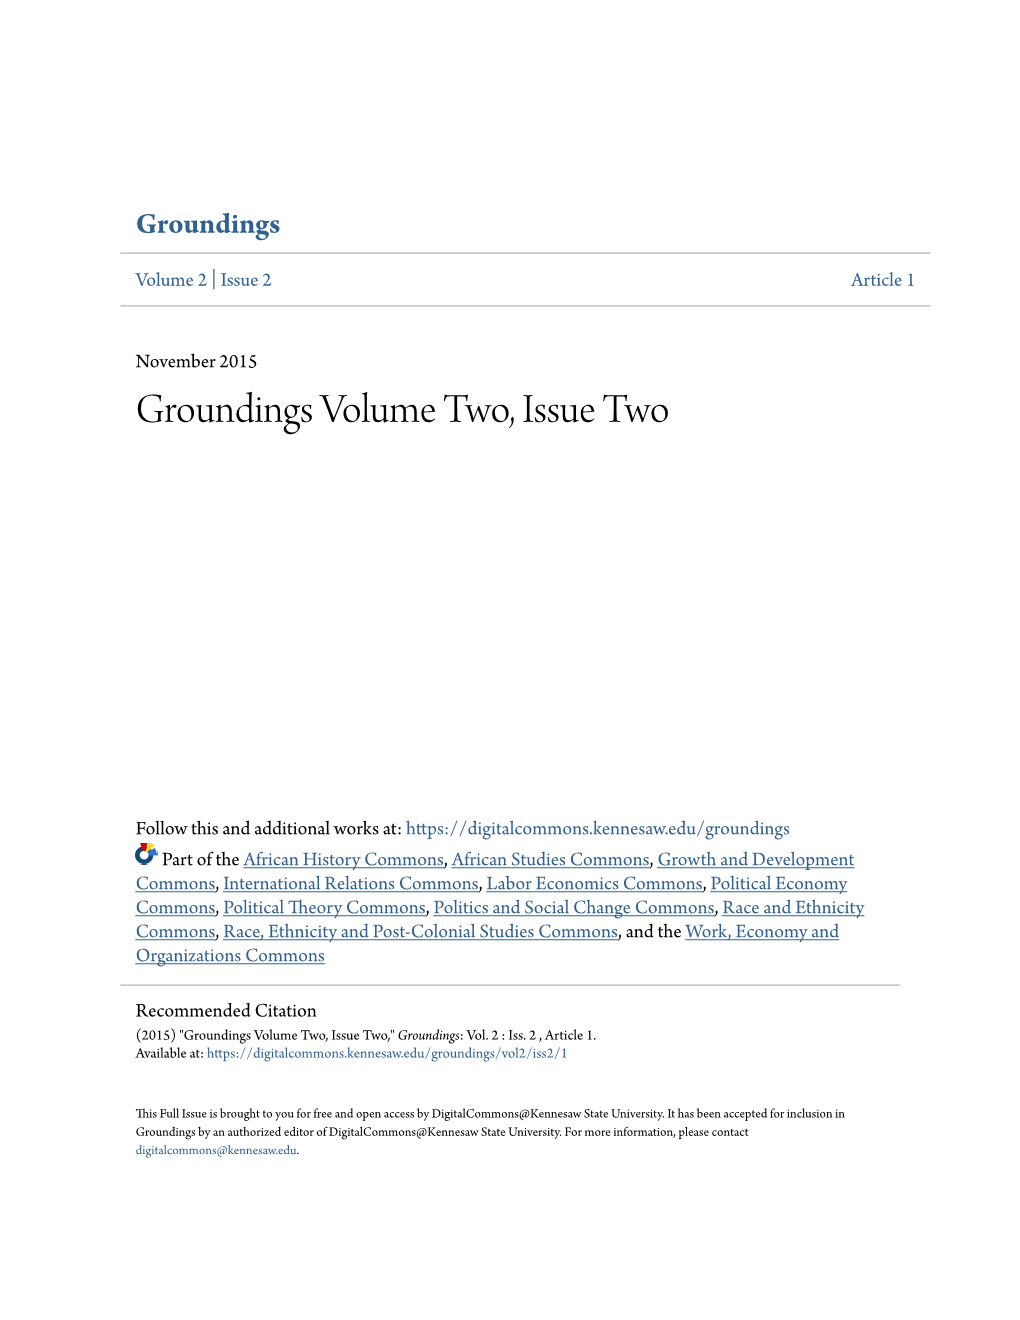 Groundings Volume Two, Issue Two